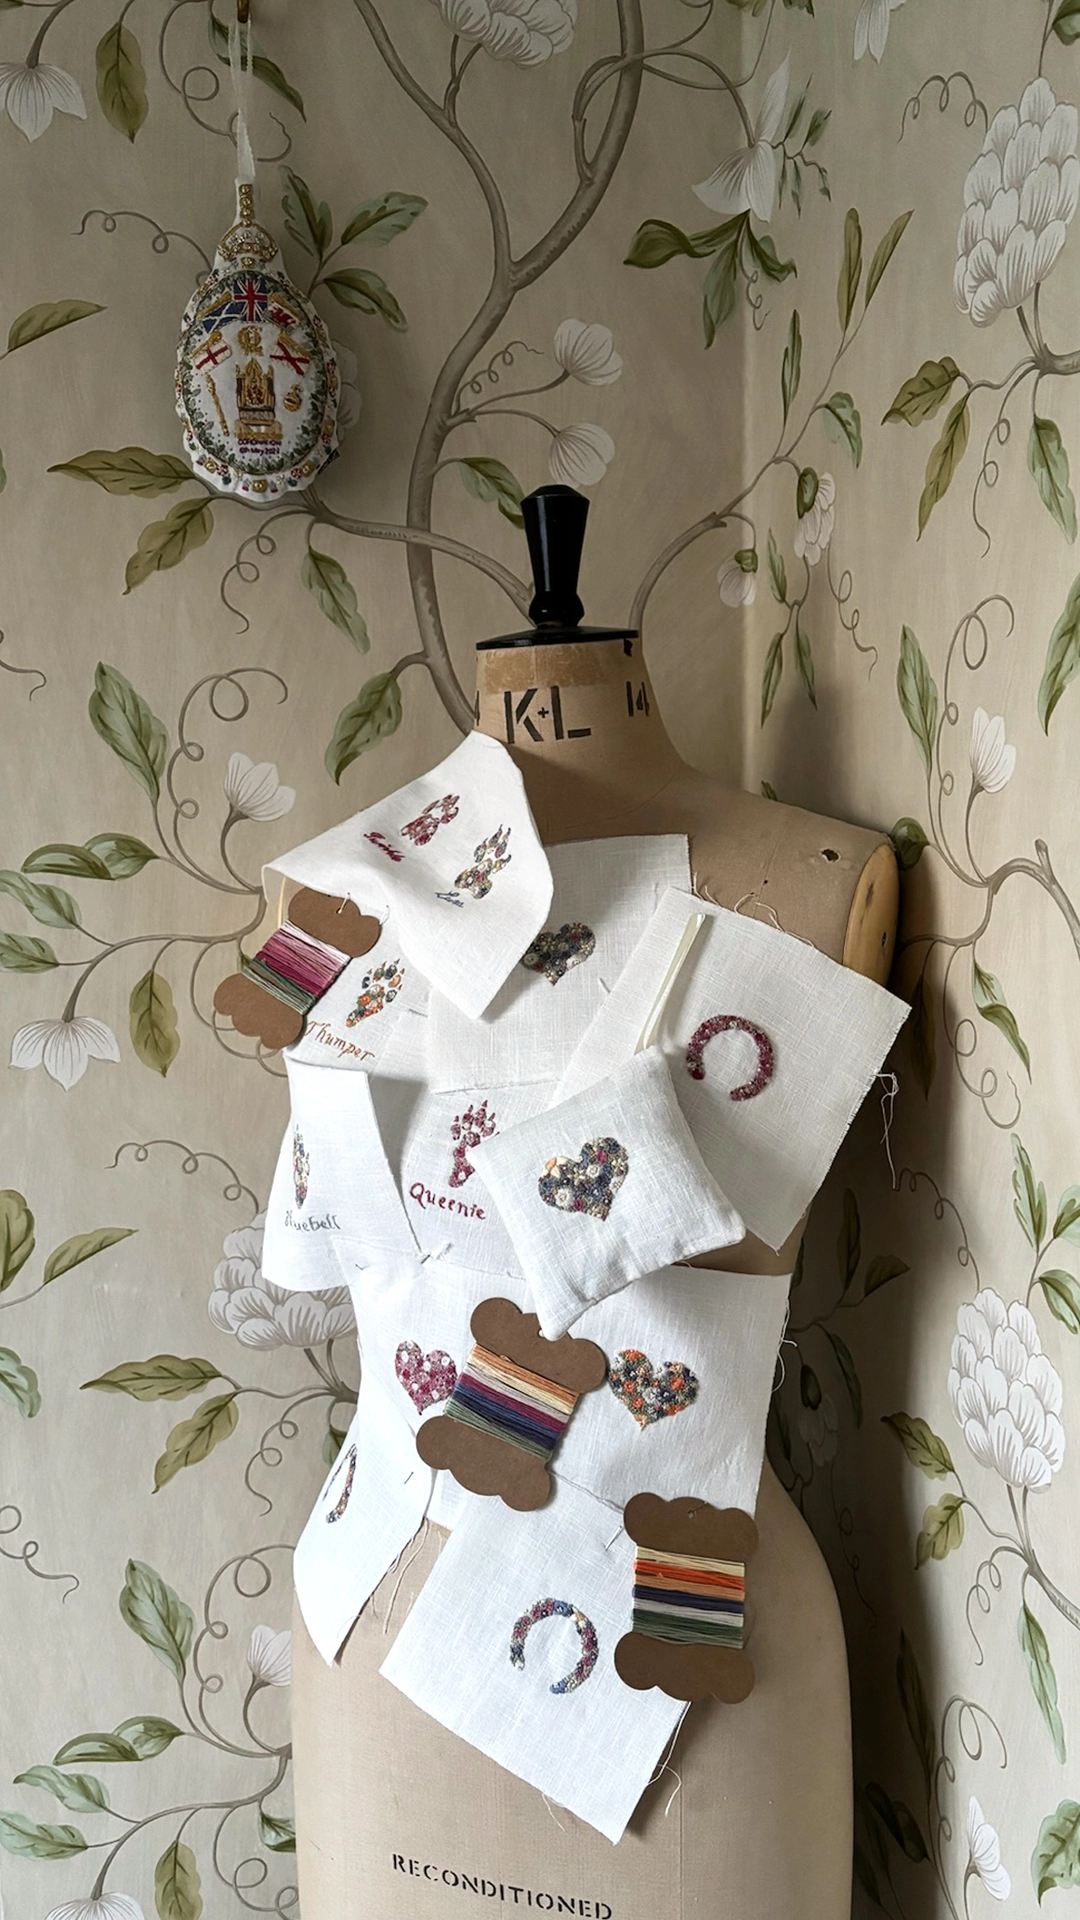 Embroidery designs and thread cards pinned to a tailors dummy in the corner of a botanical wallpapered room.  A coronation embroidery on a display hook in the background.